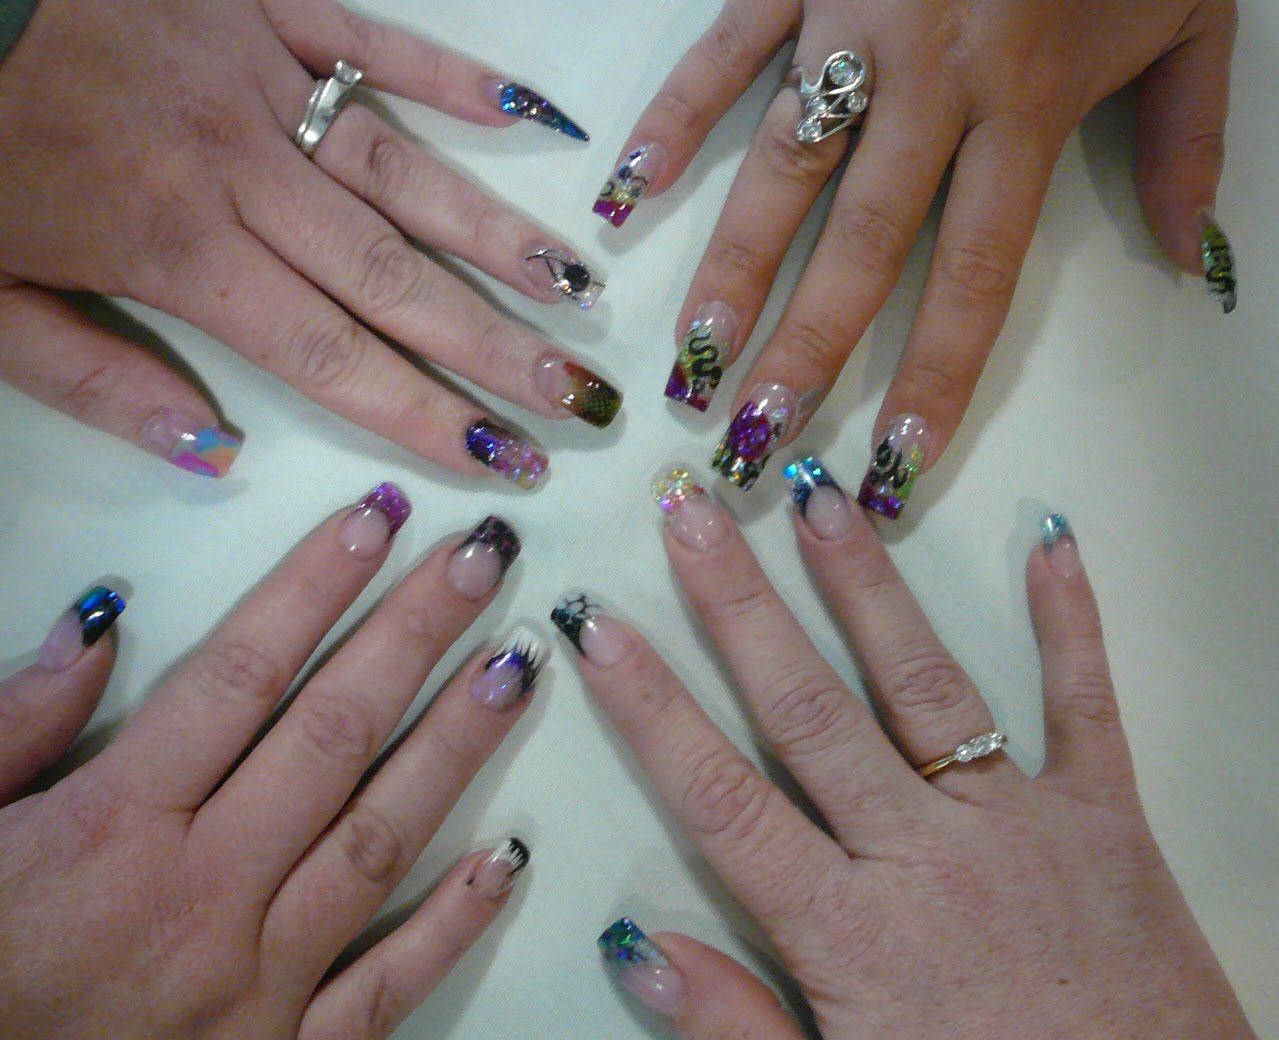 Young Nails Nail Art Classes - wide 1